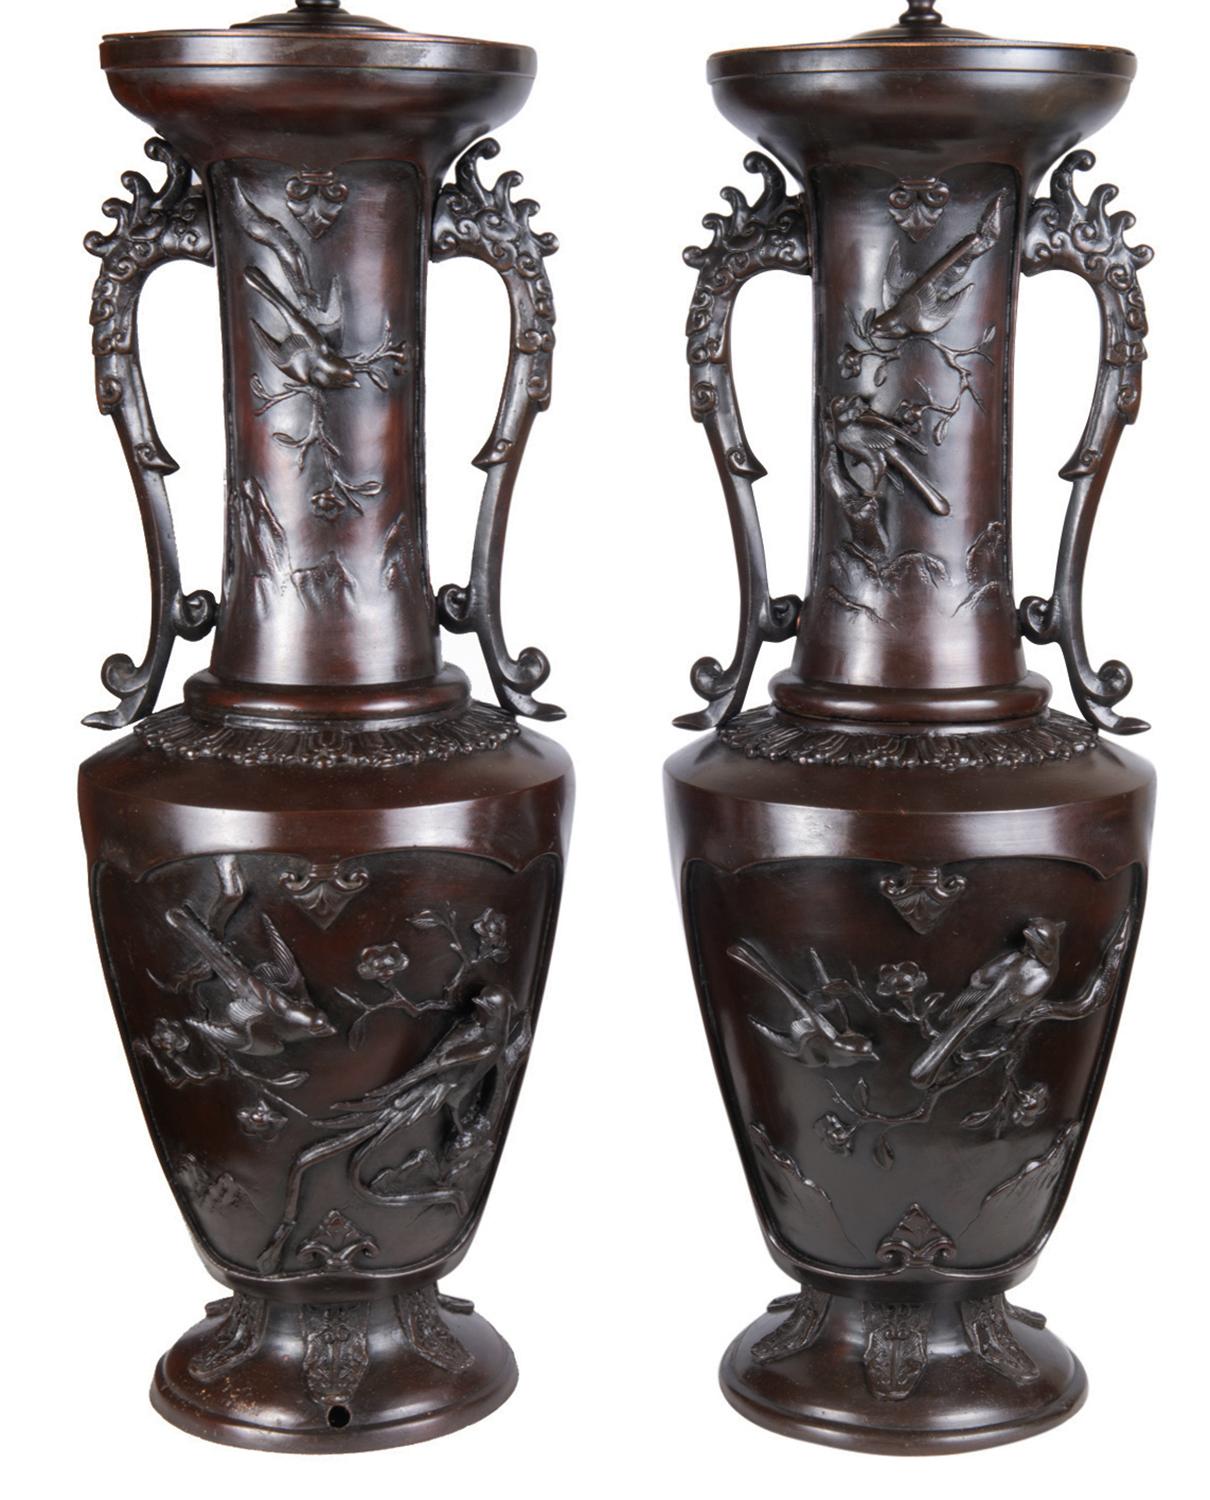 A very impressive and striking pair of 19th century Japanese (Meiji period 1868-1912) patinated and embossed bronze vases / lamps. Each with inset panels of exotic birds and plants, mythical creature like handles on either side.